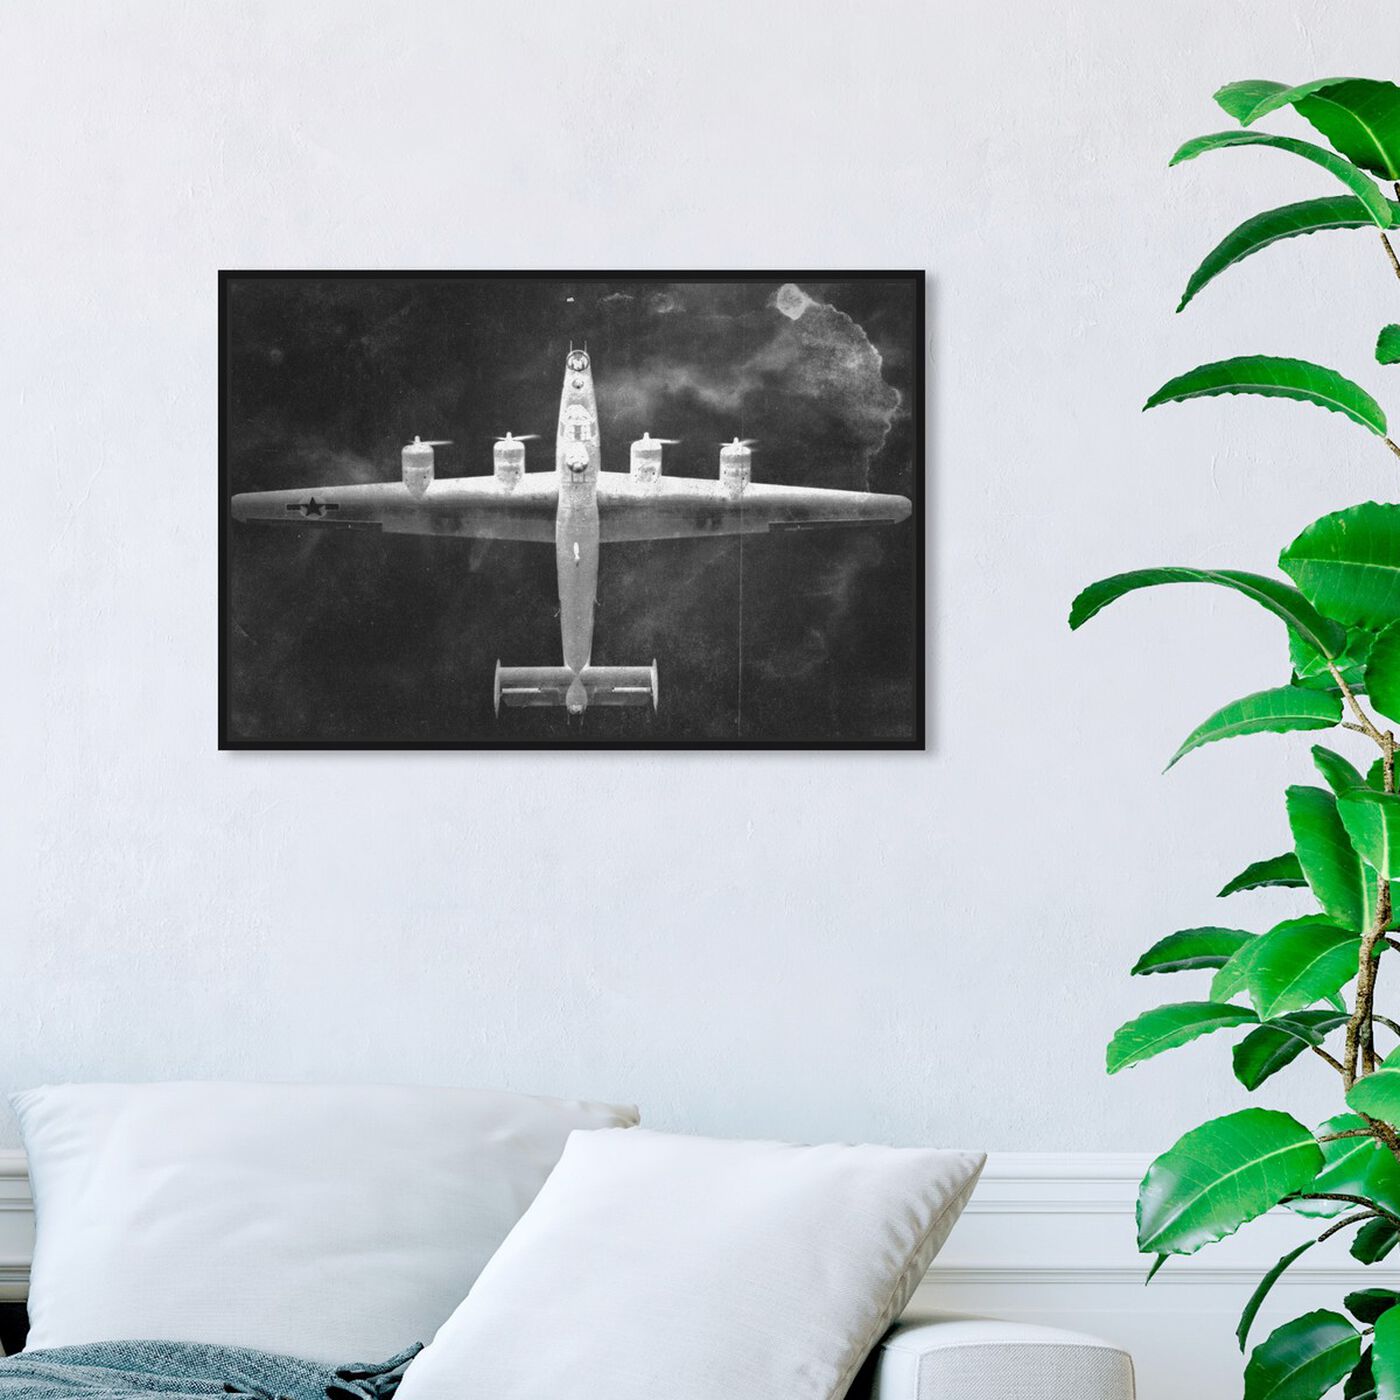 Hanging view of Aircraft Inverted featuring transportation and airplanes art.